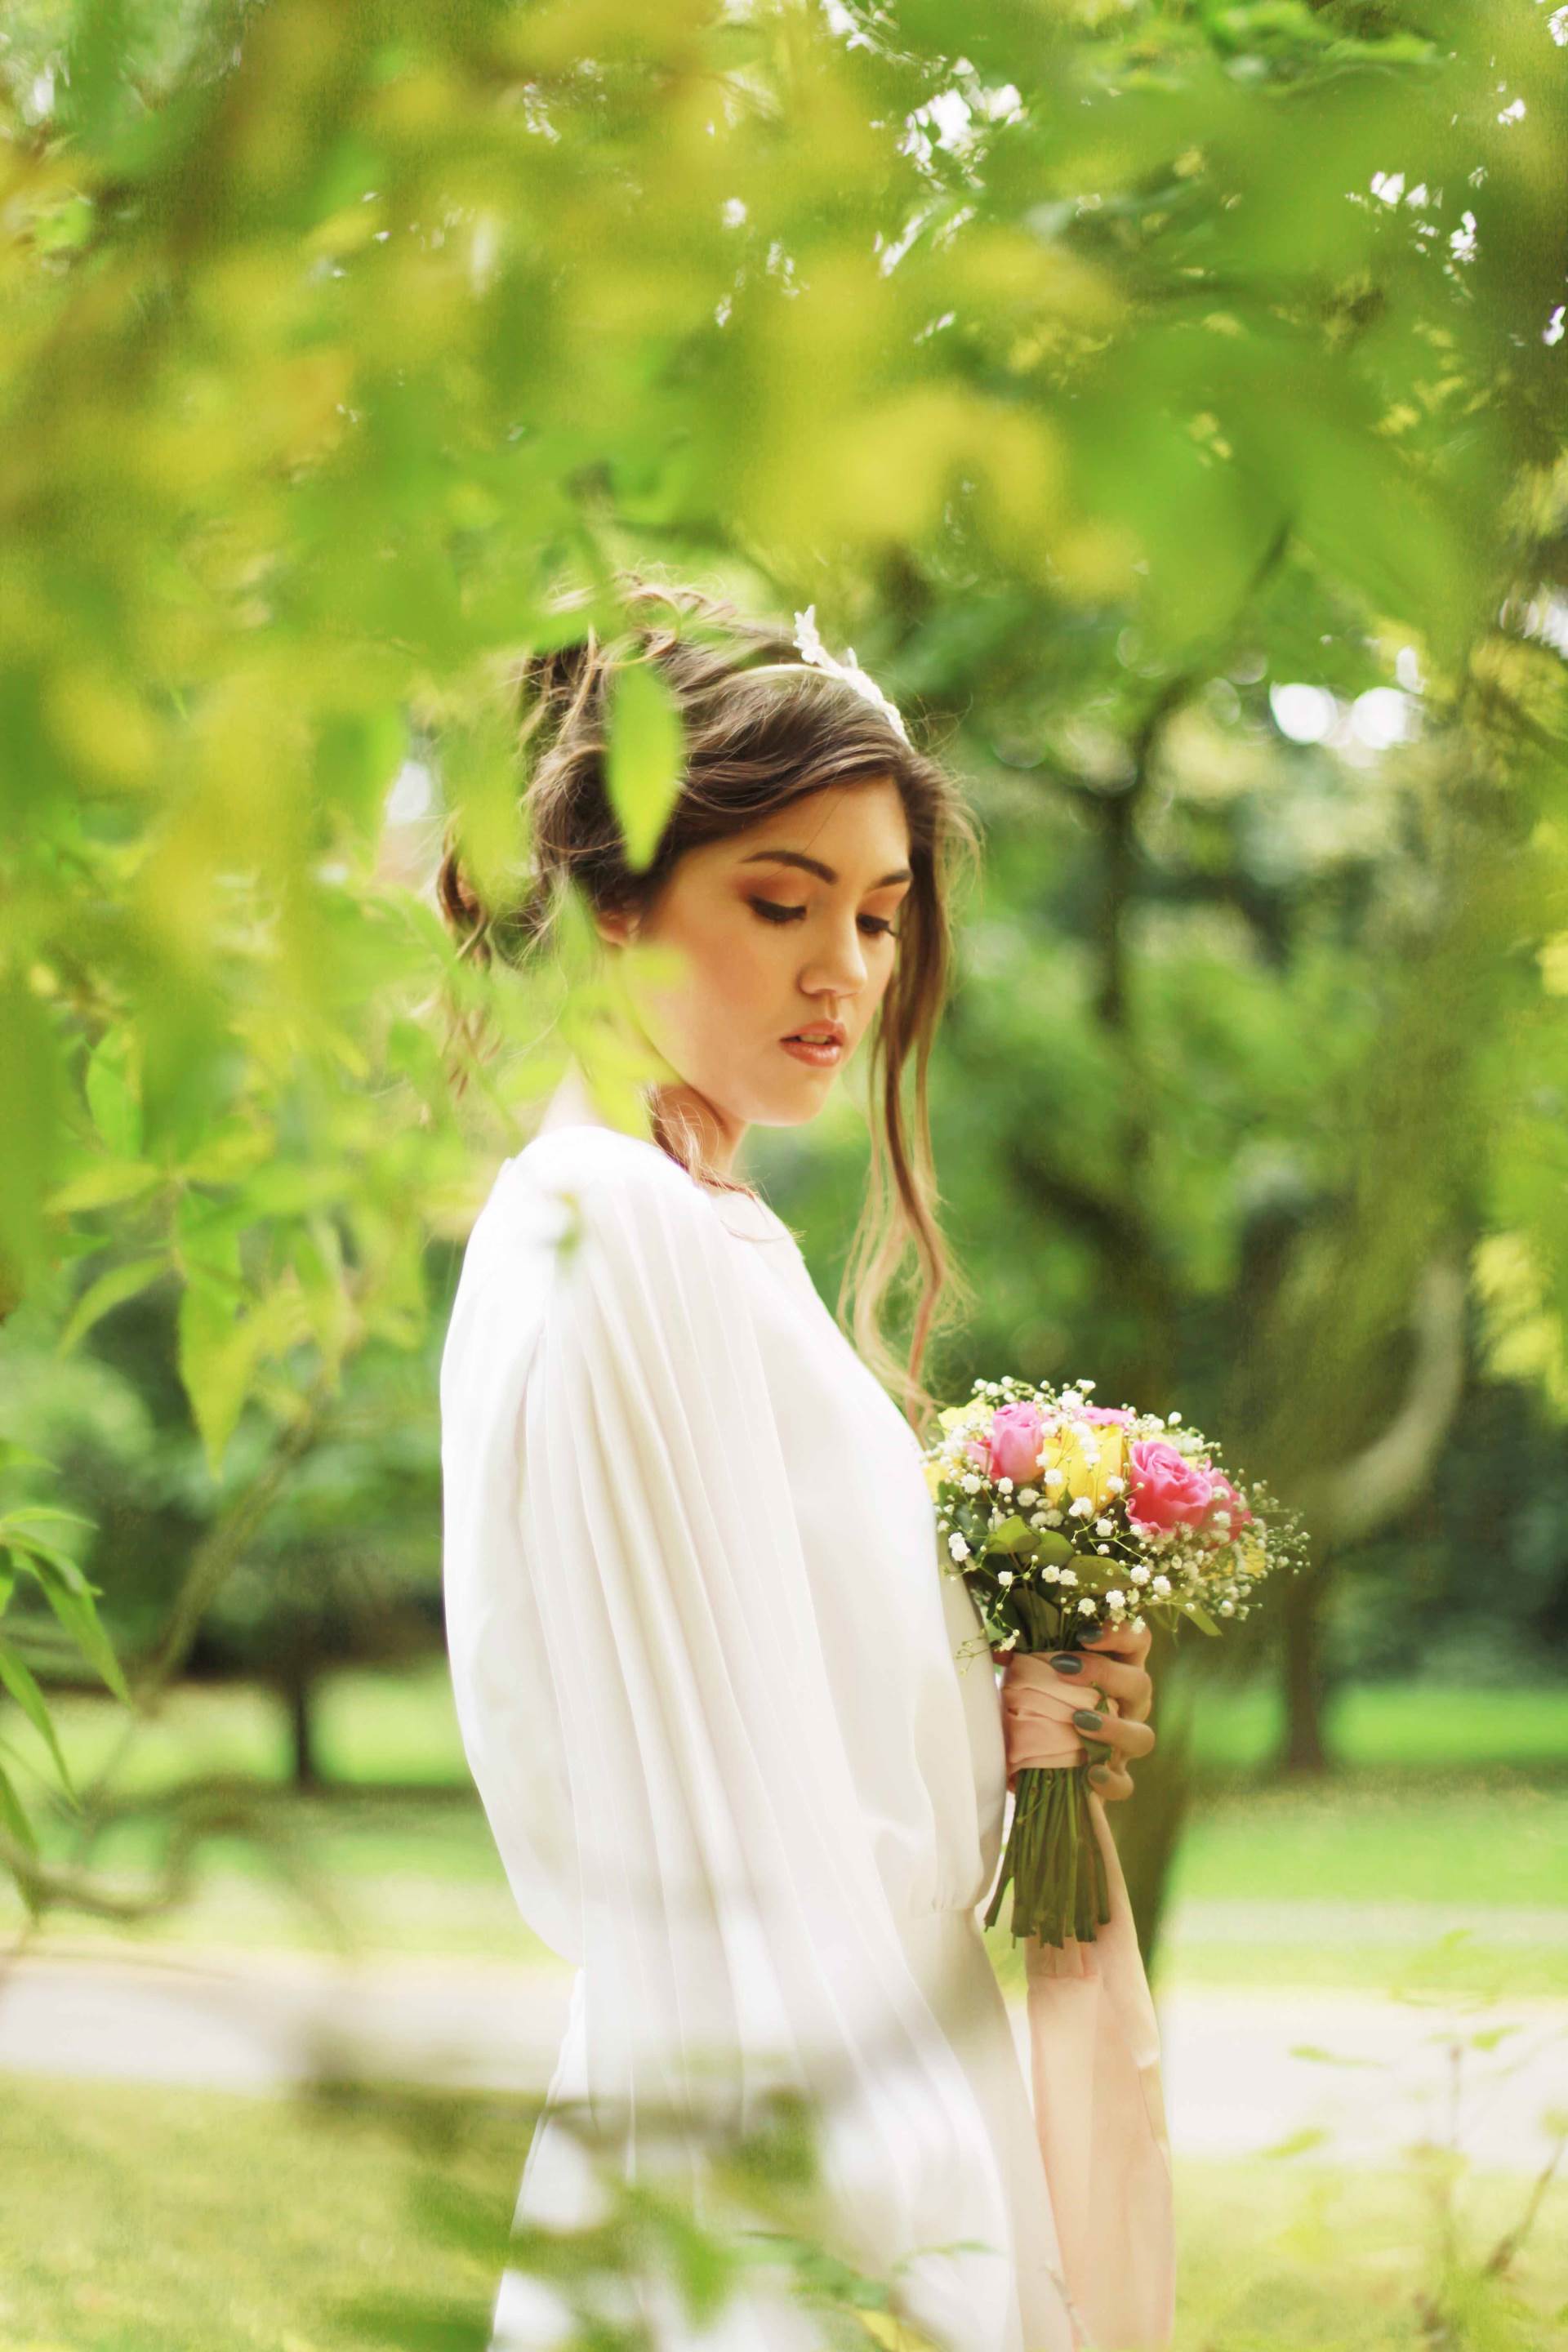 Autumn Styled Wedding Shoot by Nina Pang with vintage wedding dresses as featured on The National Vintage Wedding Fair blog